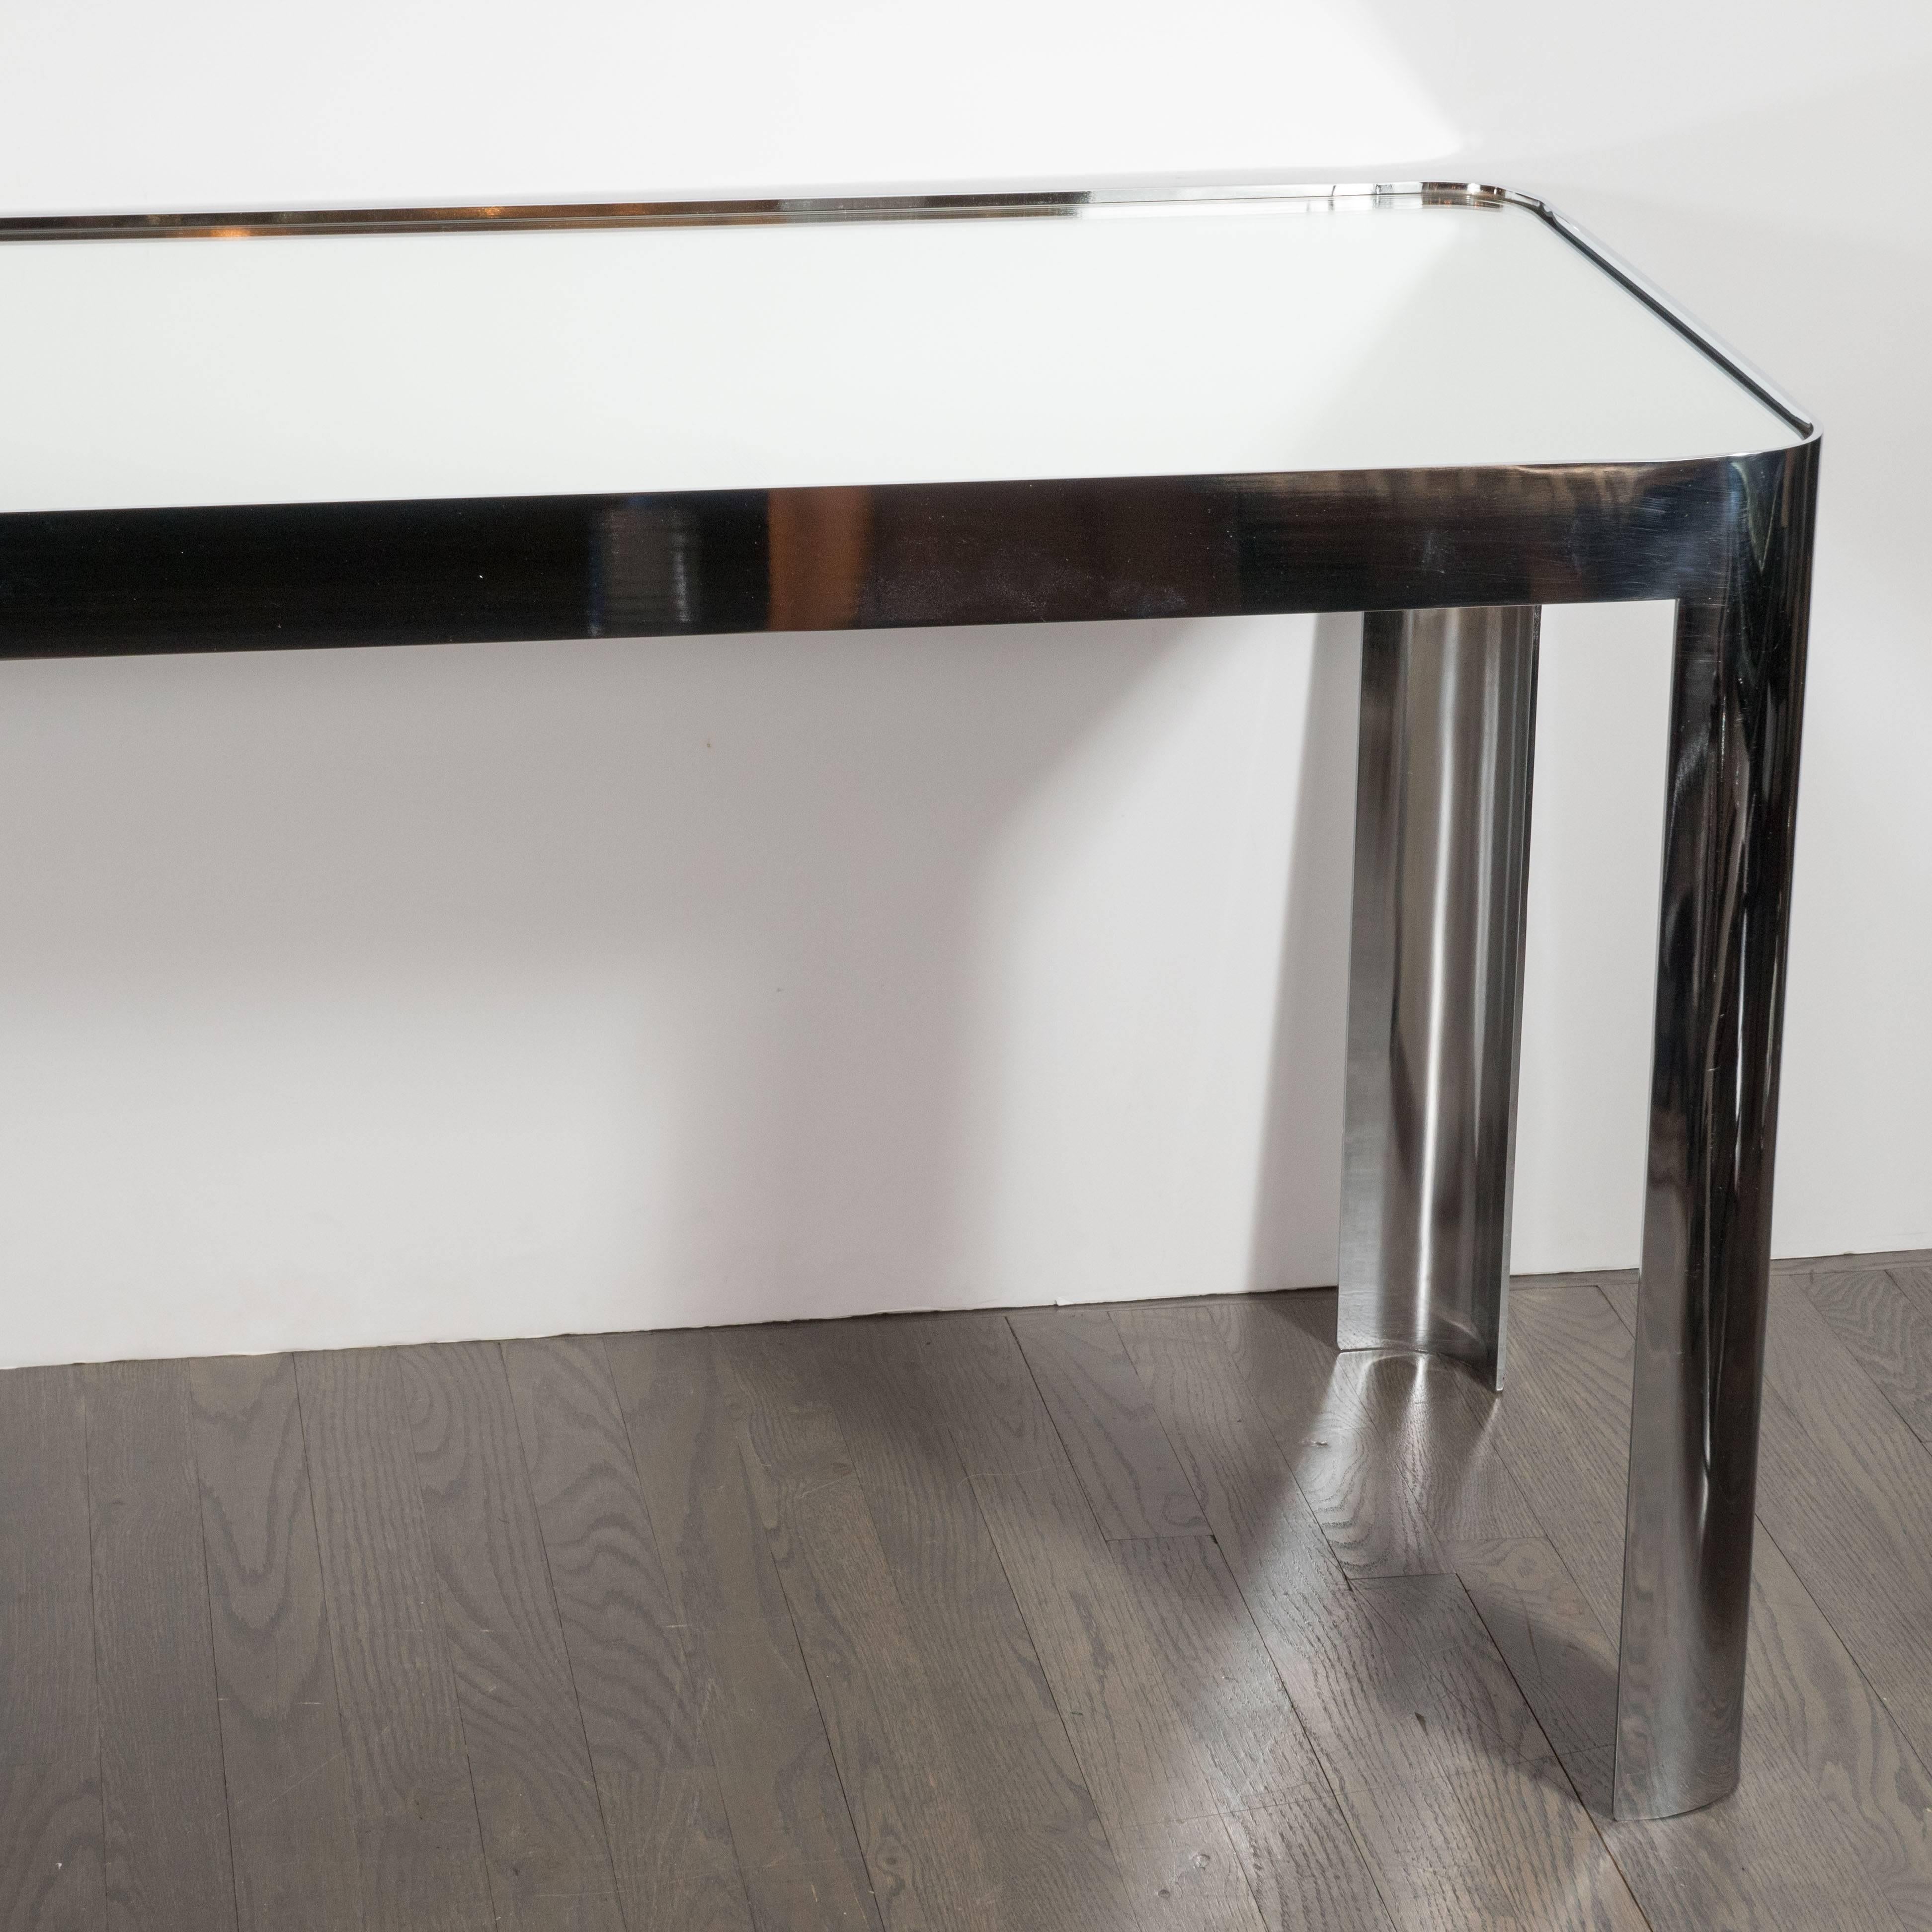 American Mid-Century Modernist Console Table in Seamless Polished Chrome & Mirror by Pace